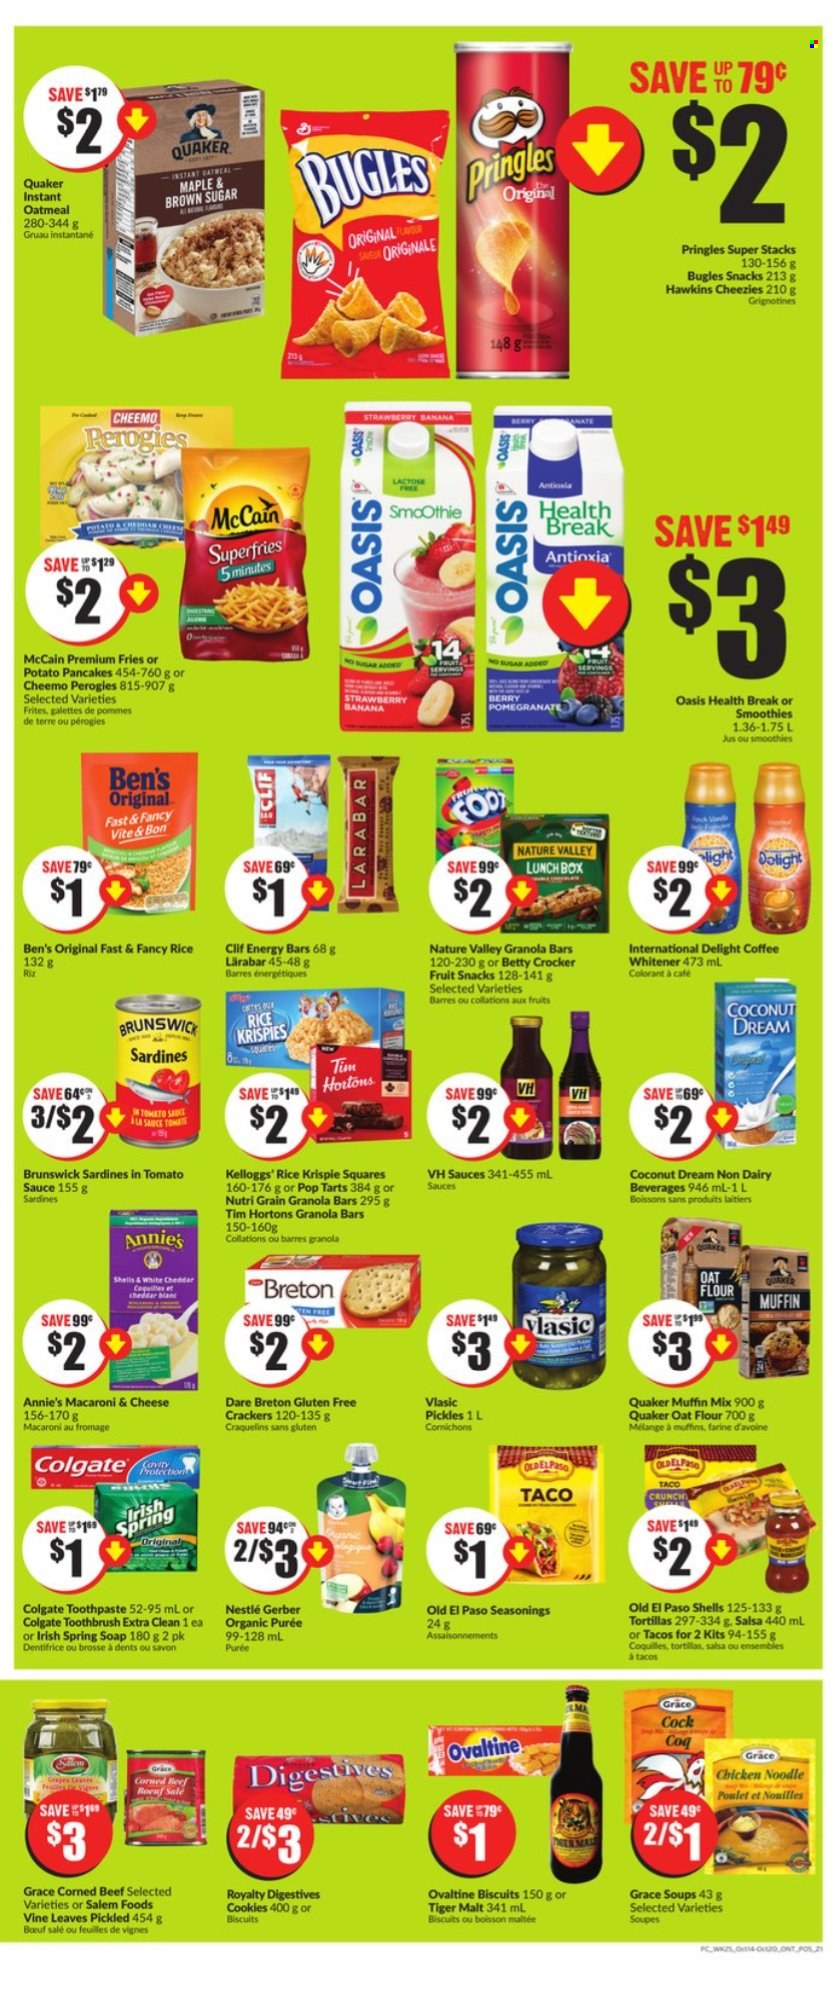 thumbnail - Chalo! FreshCo. Flyer - October 14, 2021 - October 20, 2021 - Sales products - tortillas, muffin, Old El Paso, tacos, rice squares, muffin mix, snack, pomegranate, sardines, macaroni & cheese, pierogi, soup, pasta, pancakes, Quaker, potato pancakes, Annie's, ready meal, rice sides, sardines in tomato sauce, corned beef, snack bar, coffee whitener, McCain, potato fries, cookies, cereal bar, crackers, biscuit, Pop-Tarts, fruit snack, breakfast bar, bars, Gerber, Pringles, chips, salty snack, cane sugar, oatmeal, baking mix, pickles, pickled gherkins, cornichons, canned fish, pickled vegetables, crispy rice bar, granola bar, energy bar, Nature Valley, Nutri-Grain, spice, salsa, juice, fruit juice, smoothie, baby food pouch, baby snack, soap, toothbrush, toothpaste, meal box, Colgate, Nestlé. Page 4.